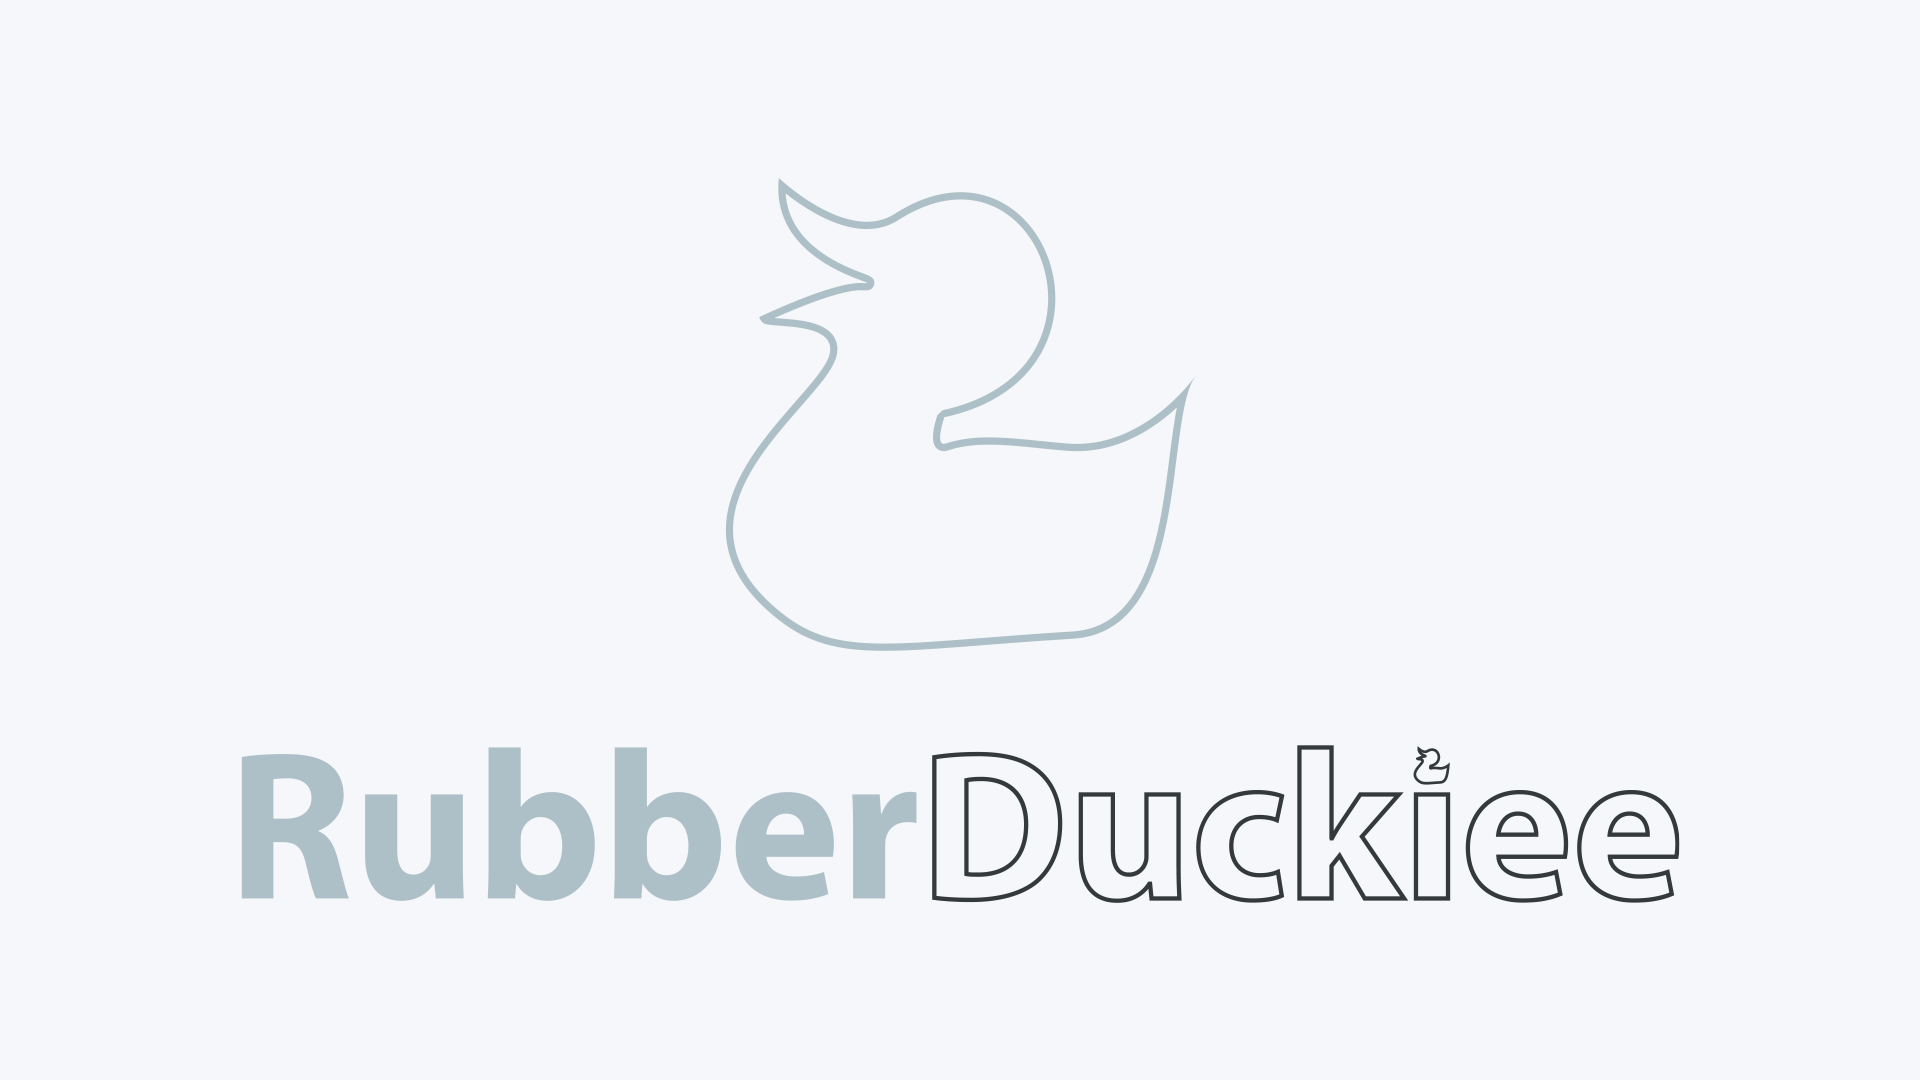 Rubber Ducks - Temporary Image, replacement coming soon!